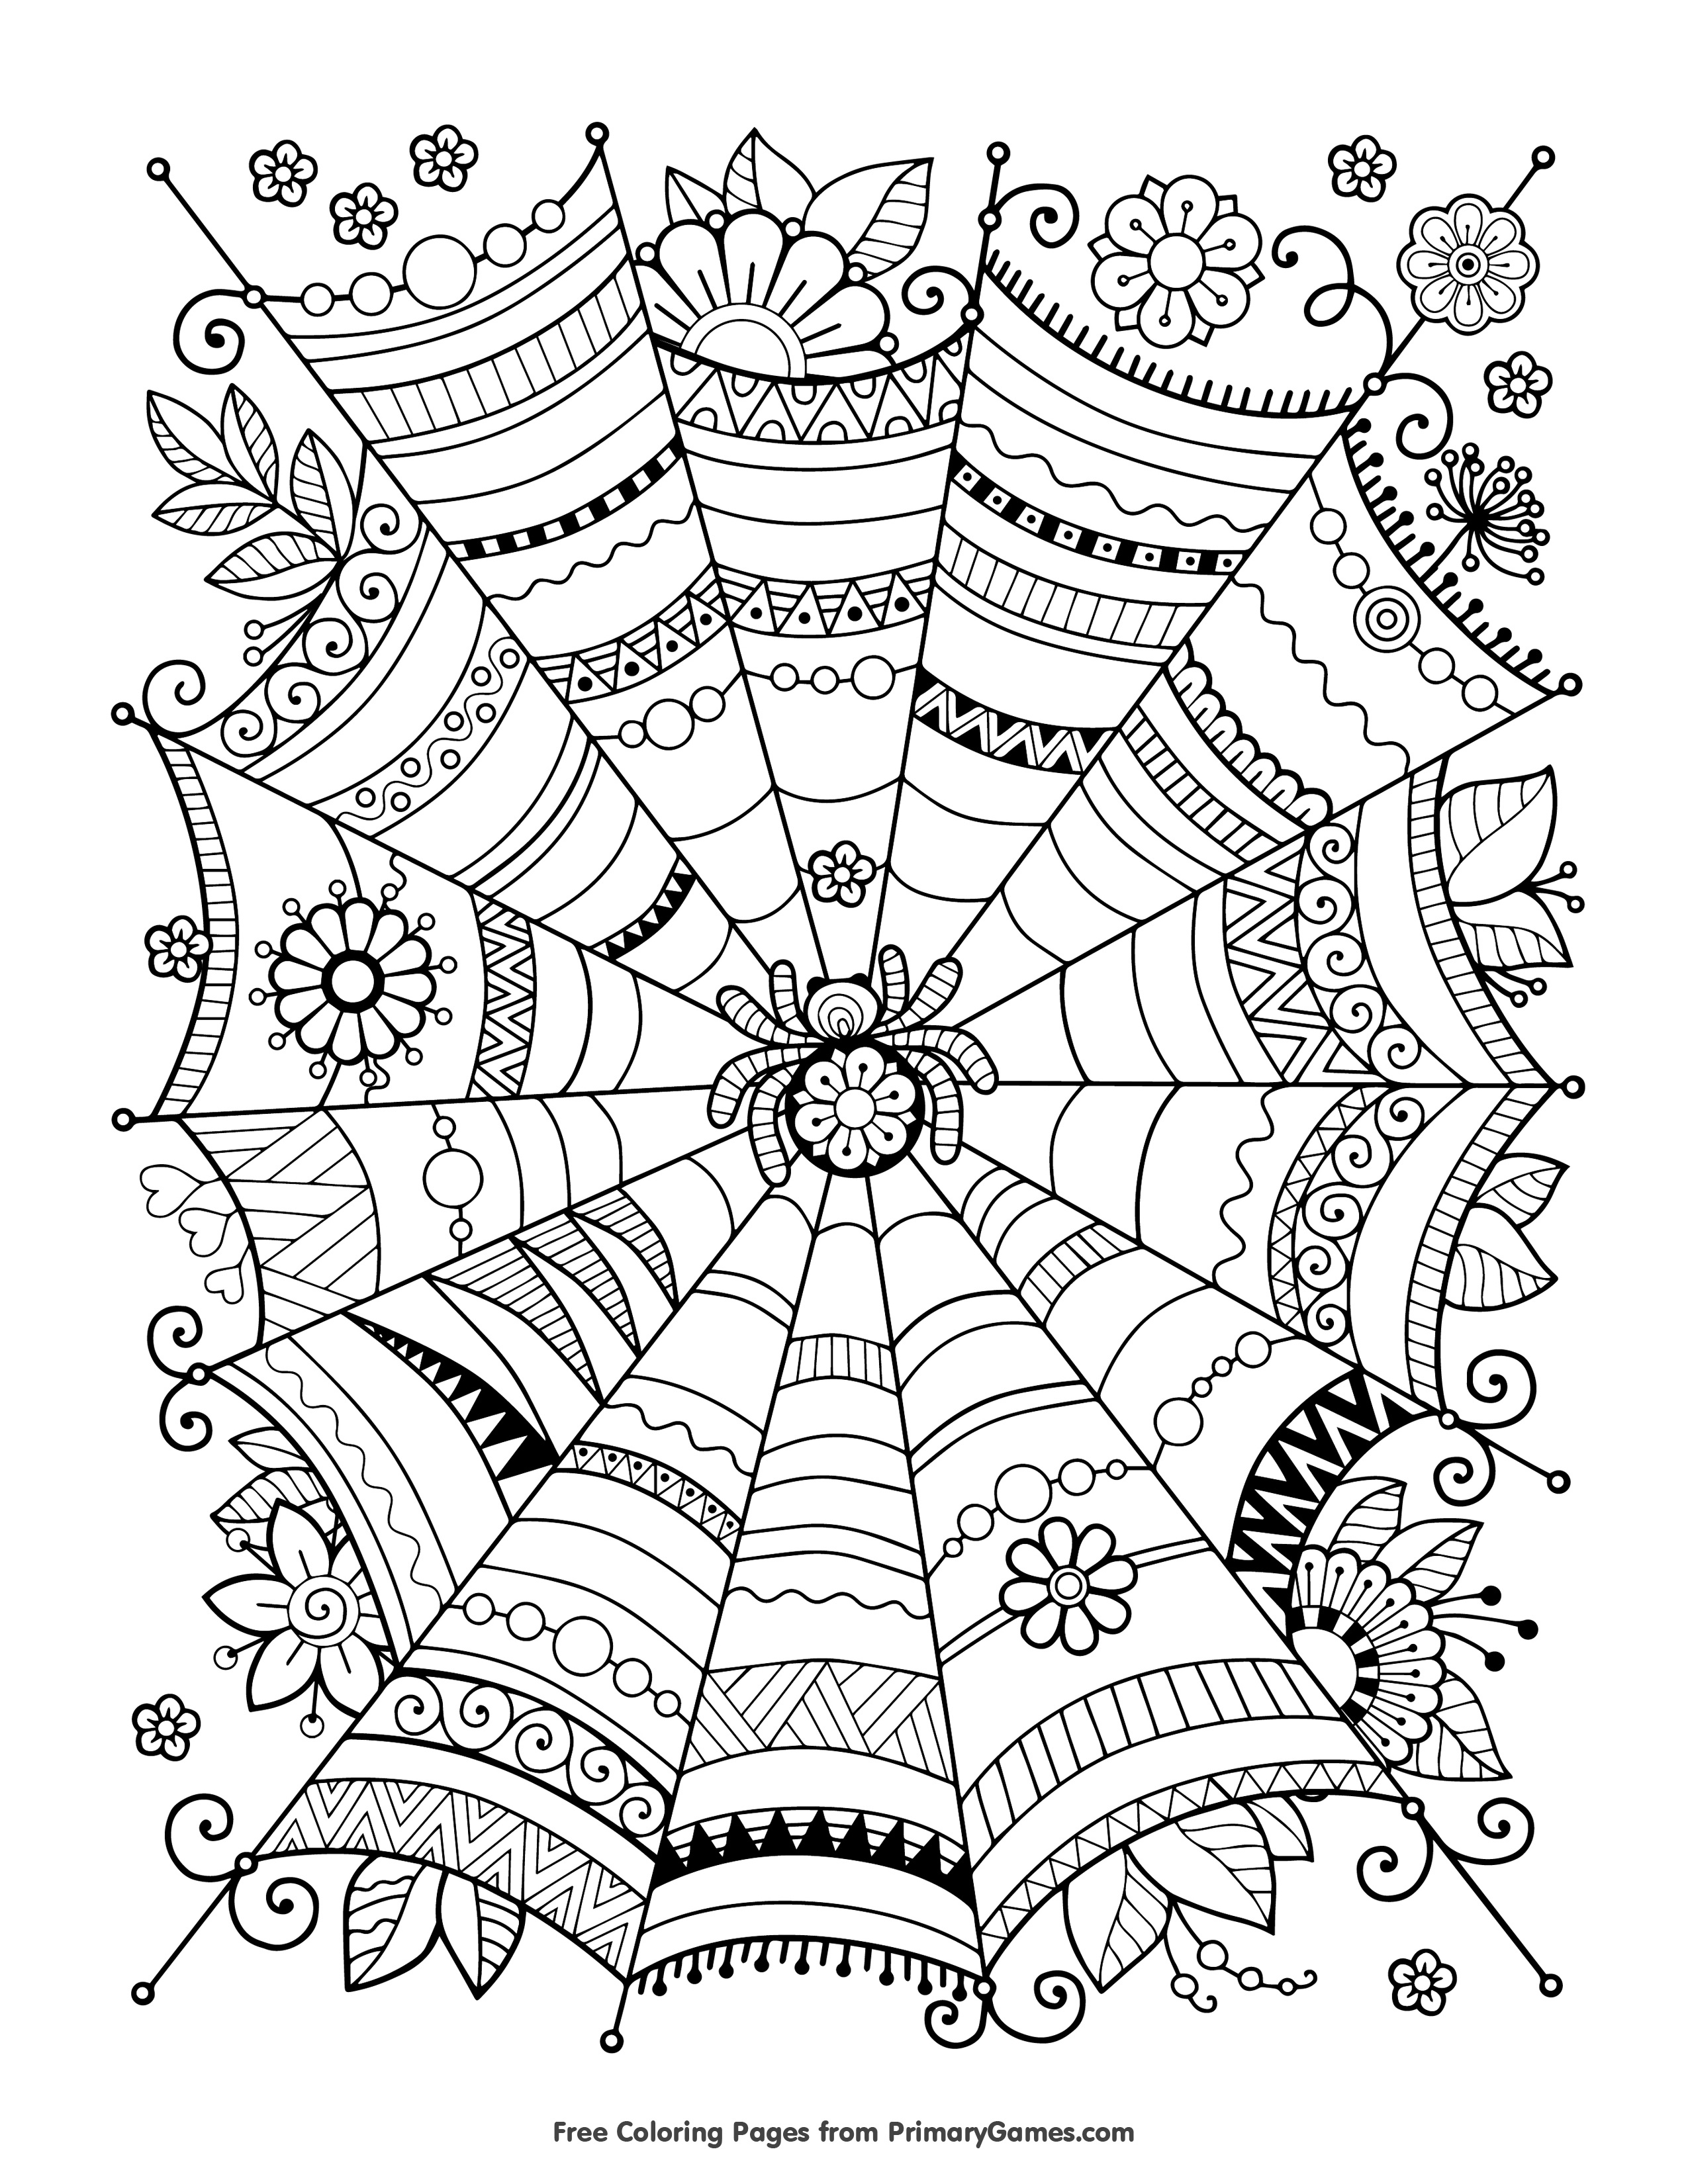 Coloring Ideas : Freeloween Coloring Pages For Adults Kids Happiness - Free Printable Halloween Coloring Pages